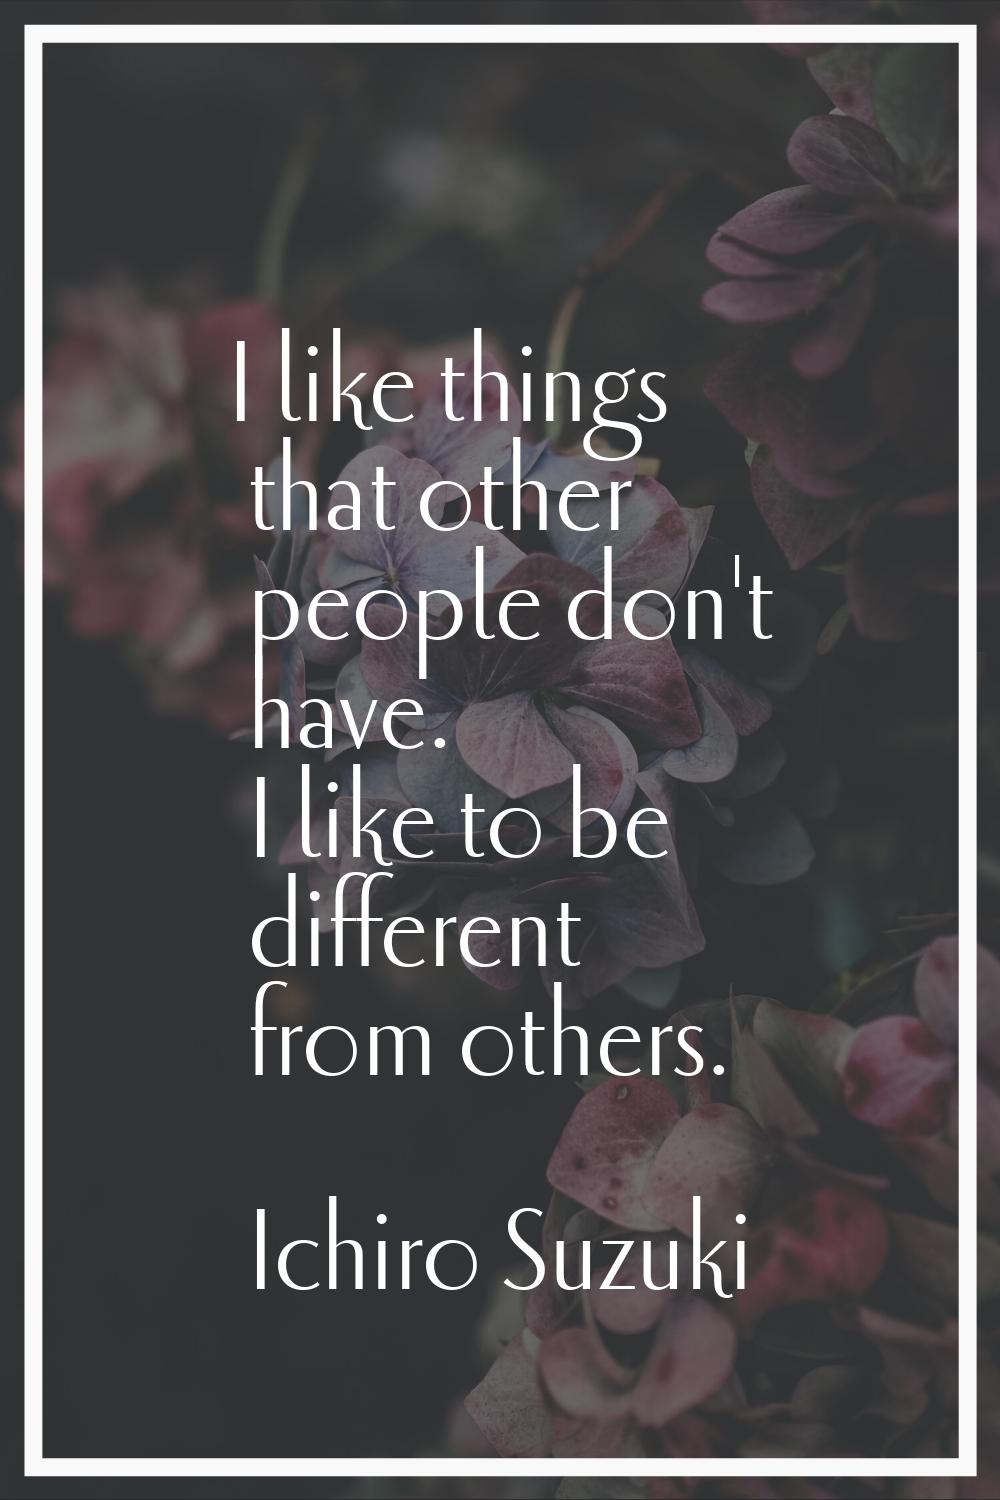 I like things that other people don't have. I like to be different from others.